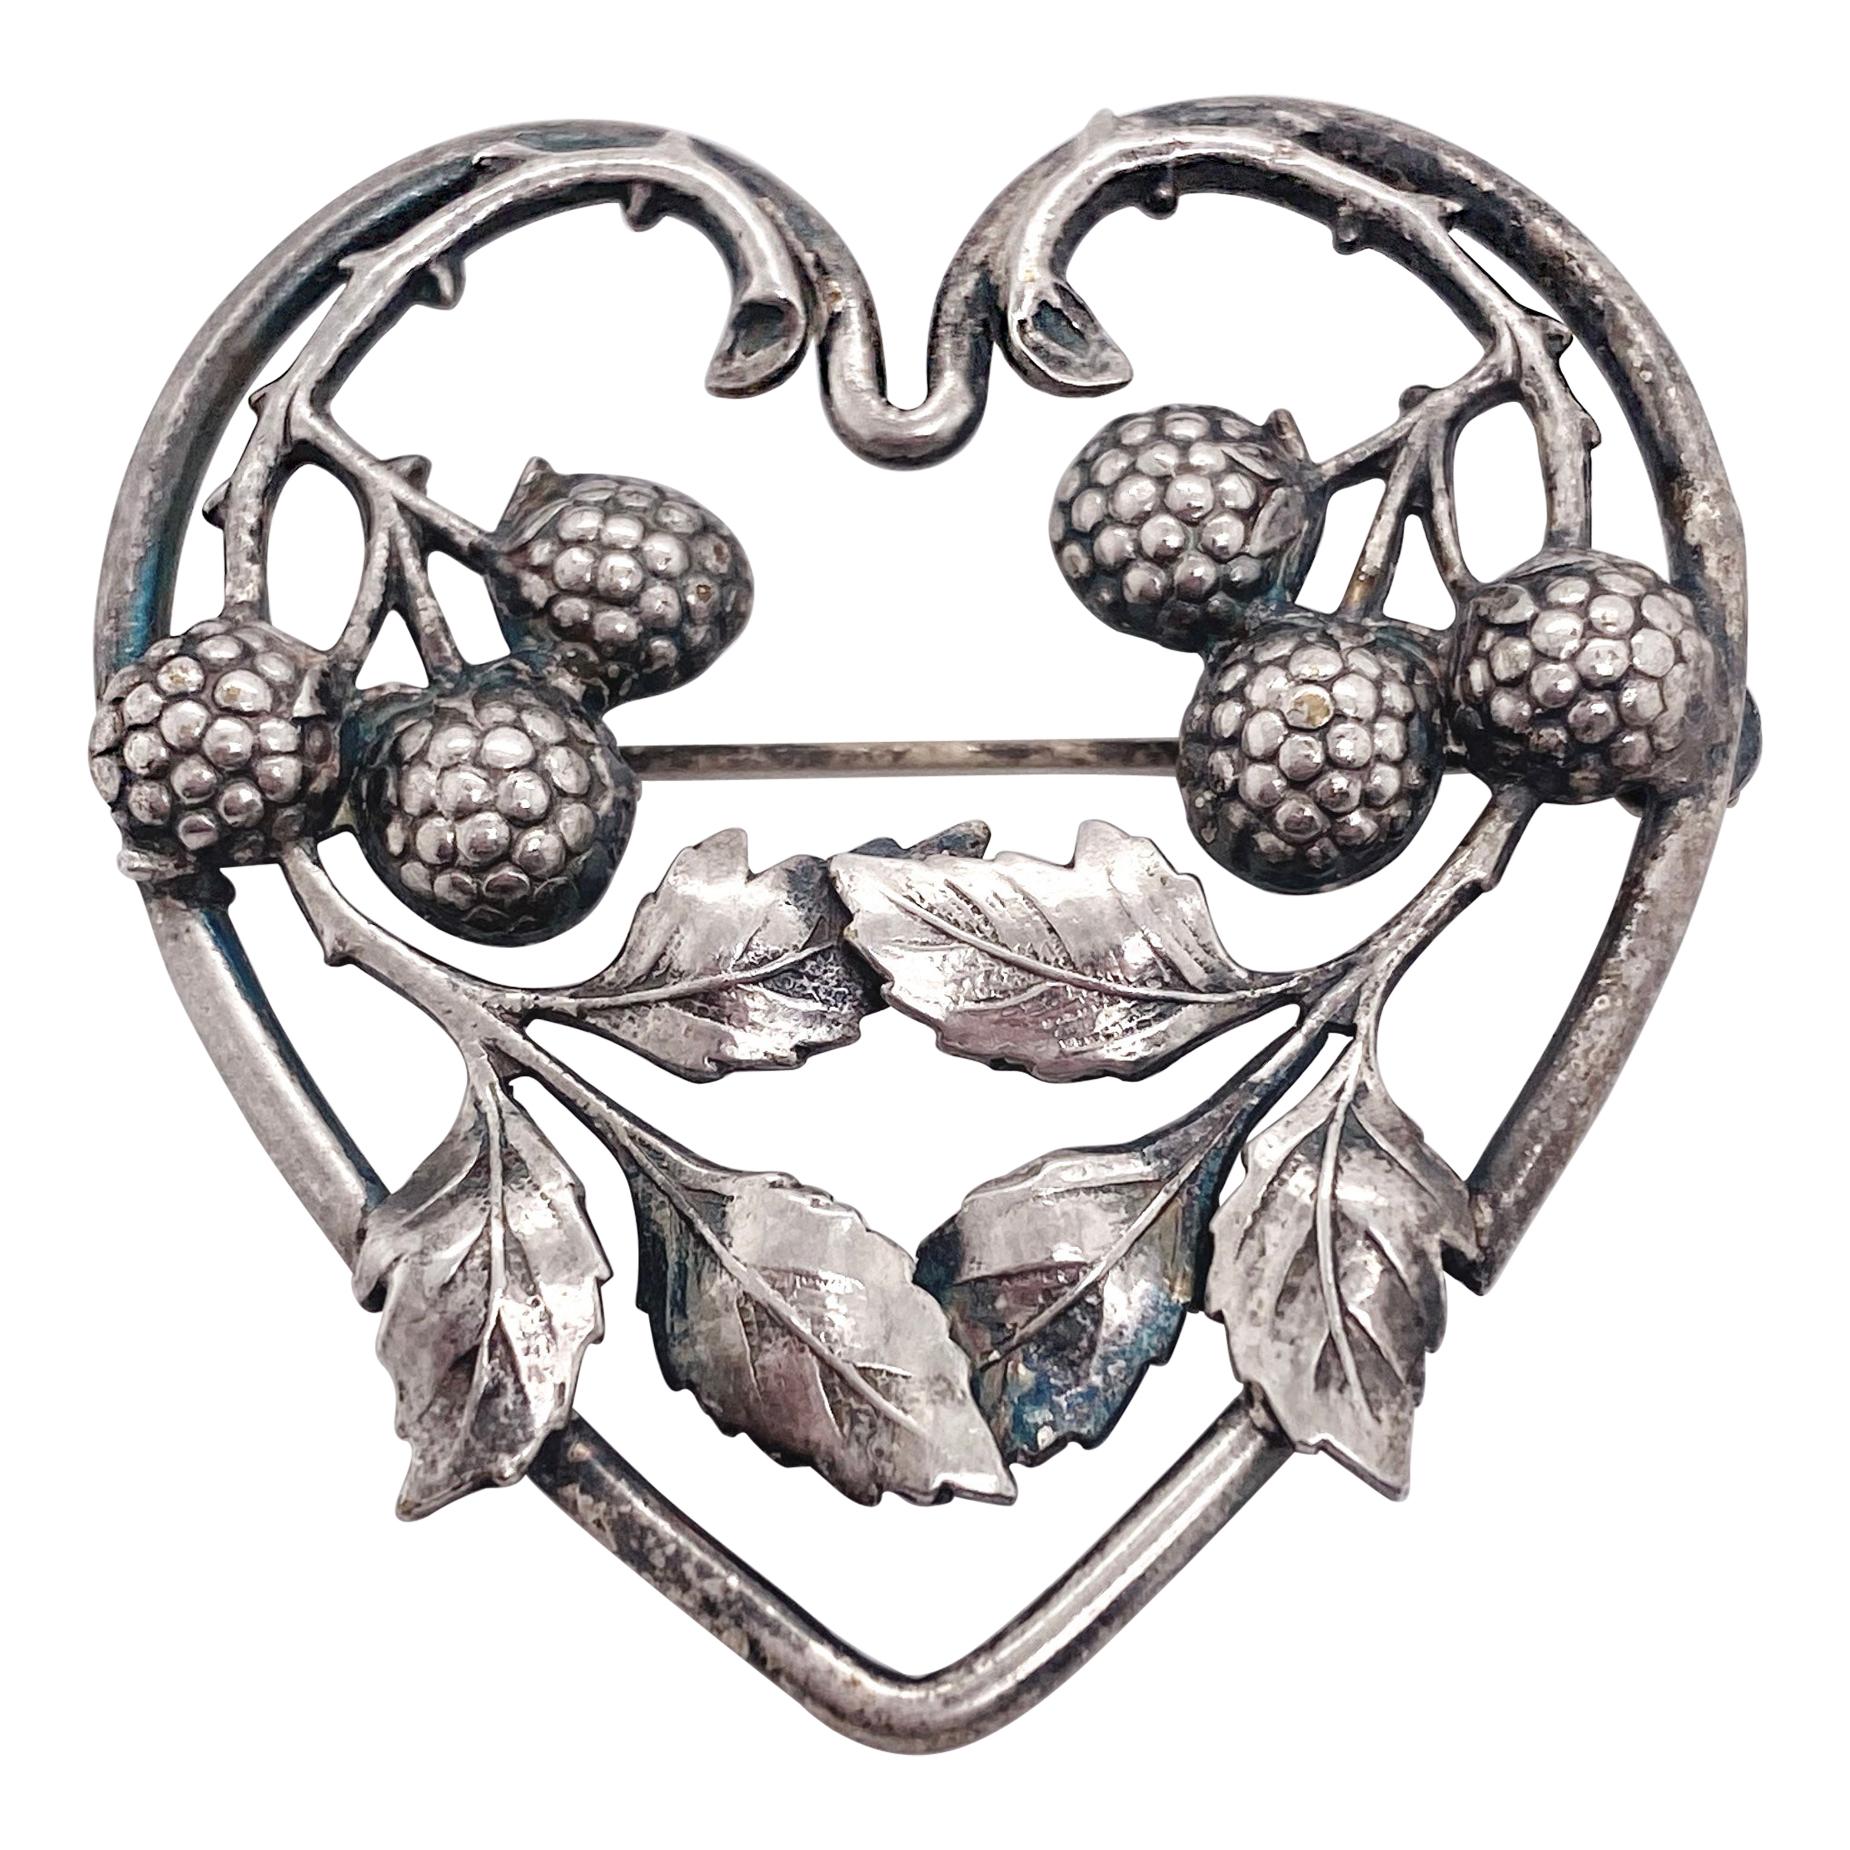 Acorn Heart Brooch Sterling Silver Vine Heart, Large Nature Inspired, circa 1869 For Sale